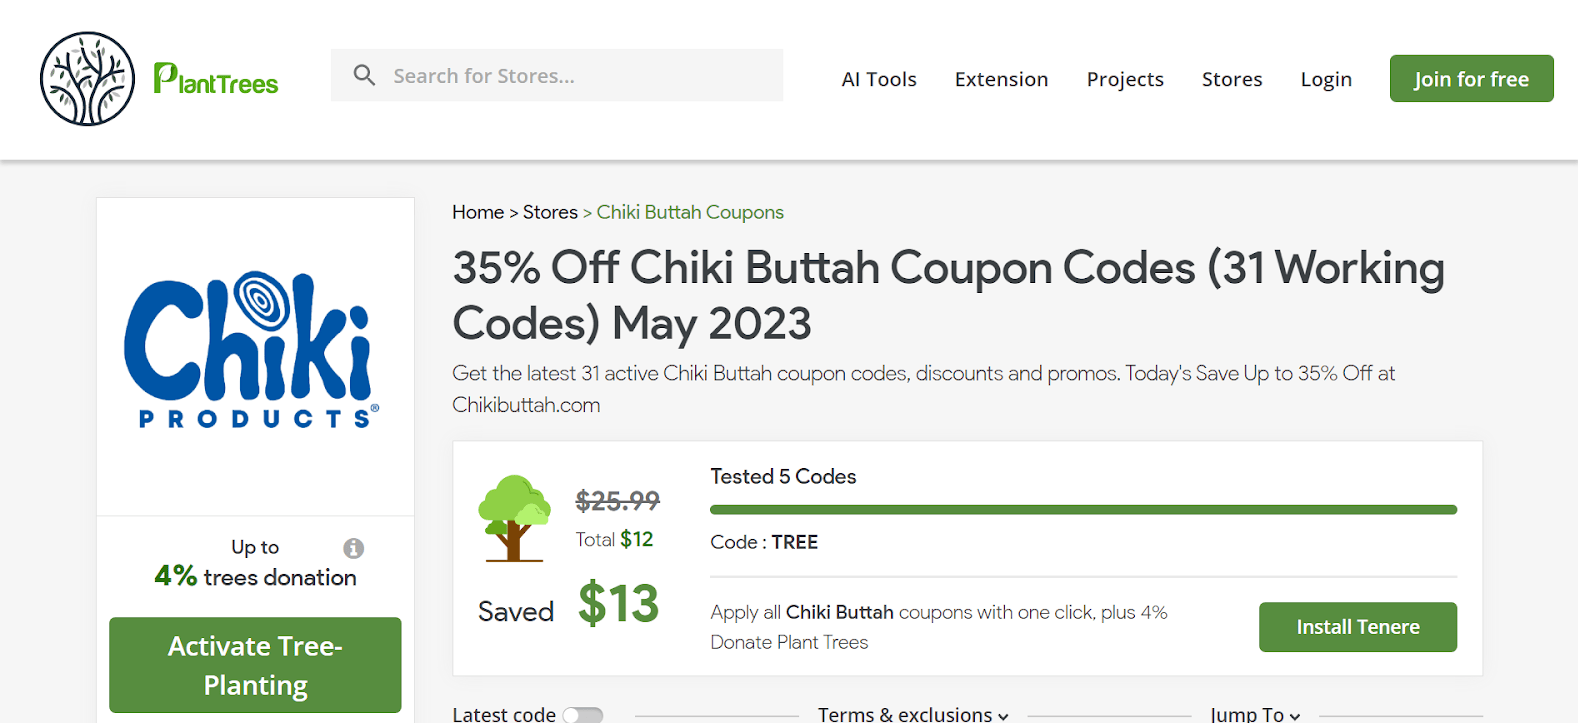 How To Use Chiki Buttah Discount Codes 2